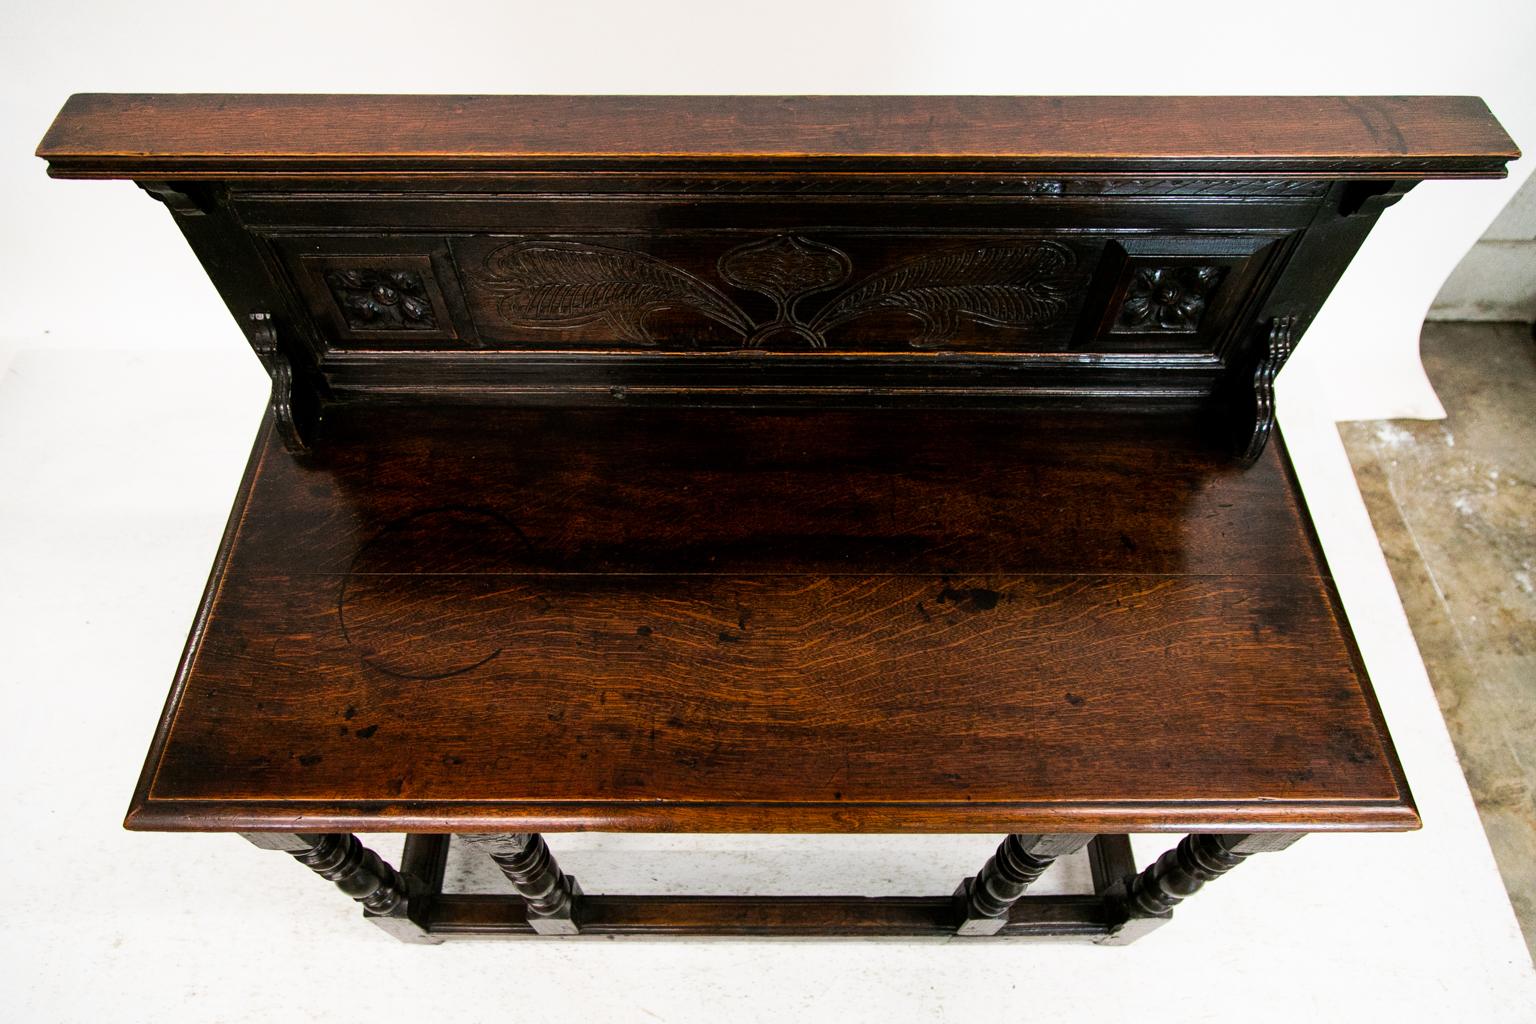 The lower section of this English oak side table was likely reconstructed from an early English gate leg table. The table top and carved back gallery were constructed in the late 19th century on top of the earlier gate leg table base.
 